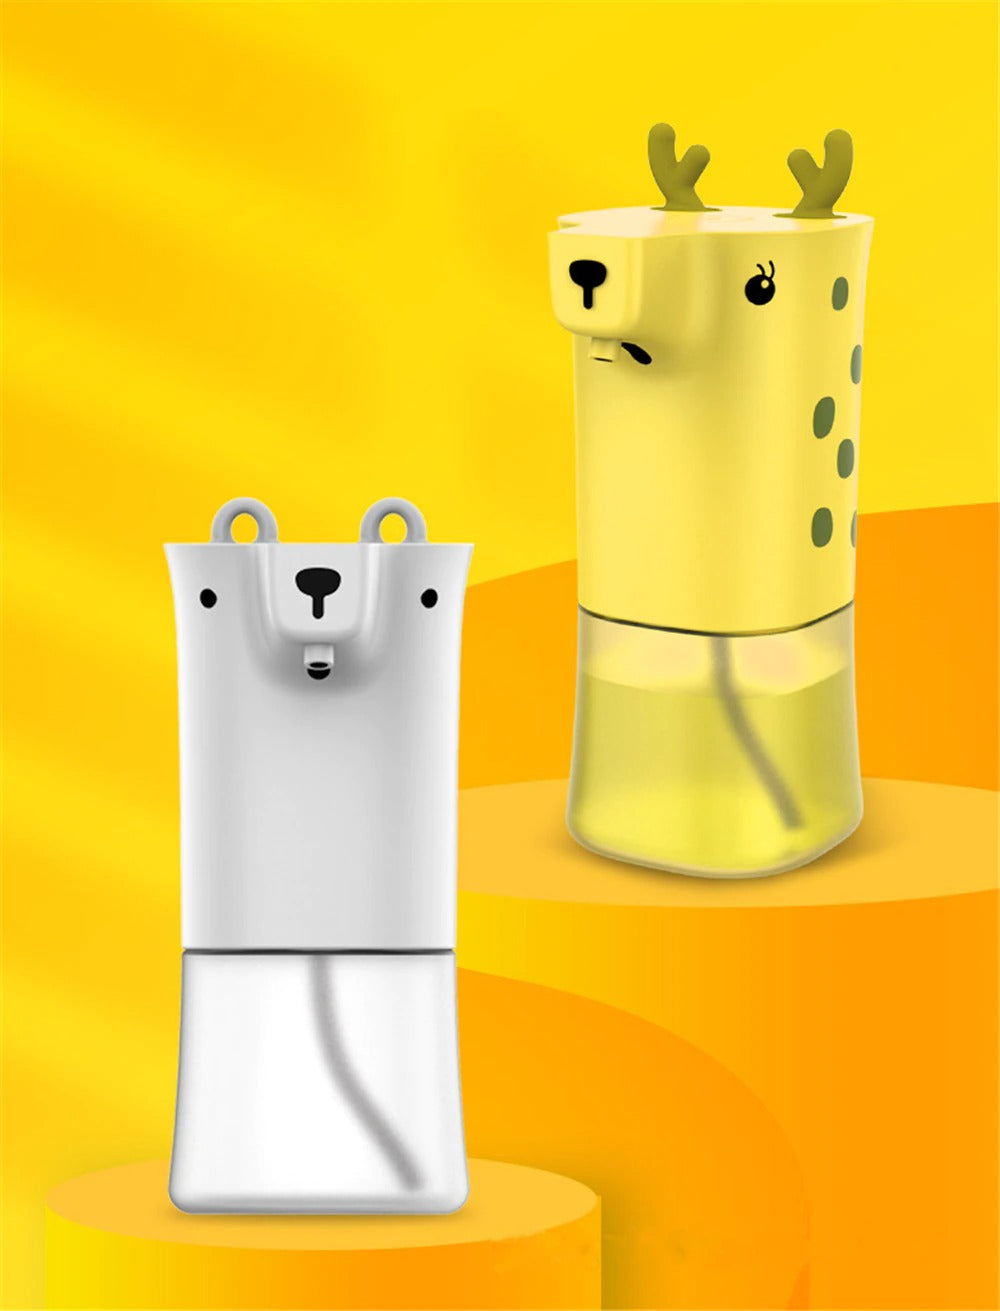 A pair of kids soap dispenser, one which looks like a cartoon giraffe and the other is white.  The background is orange and yellow.